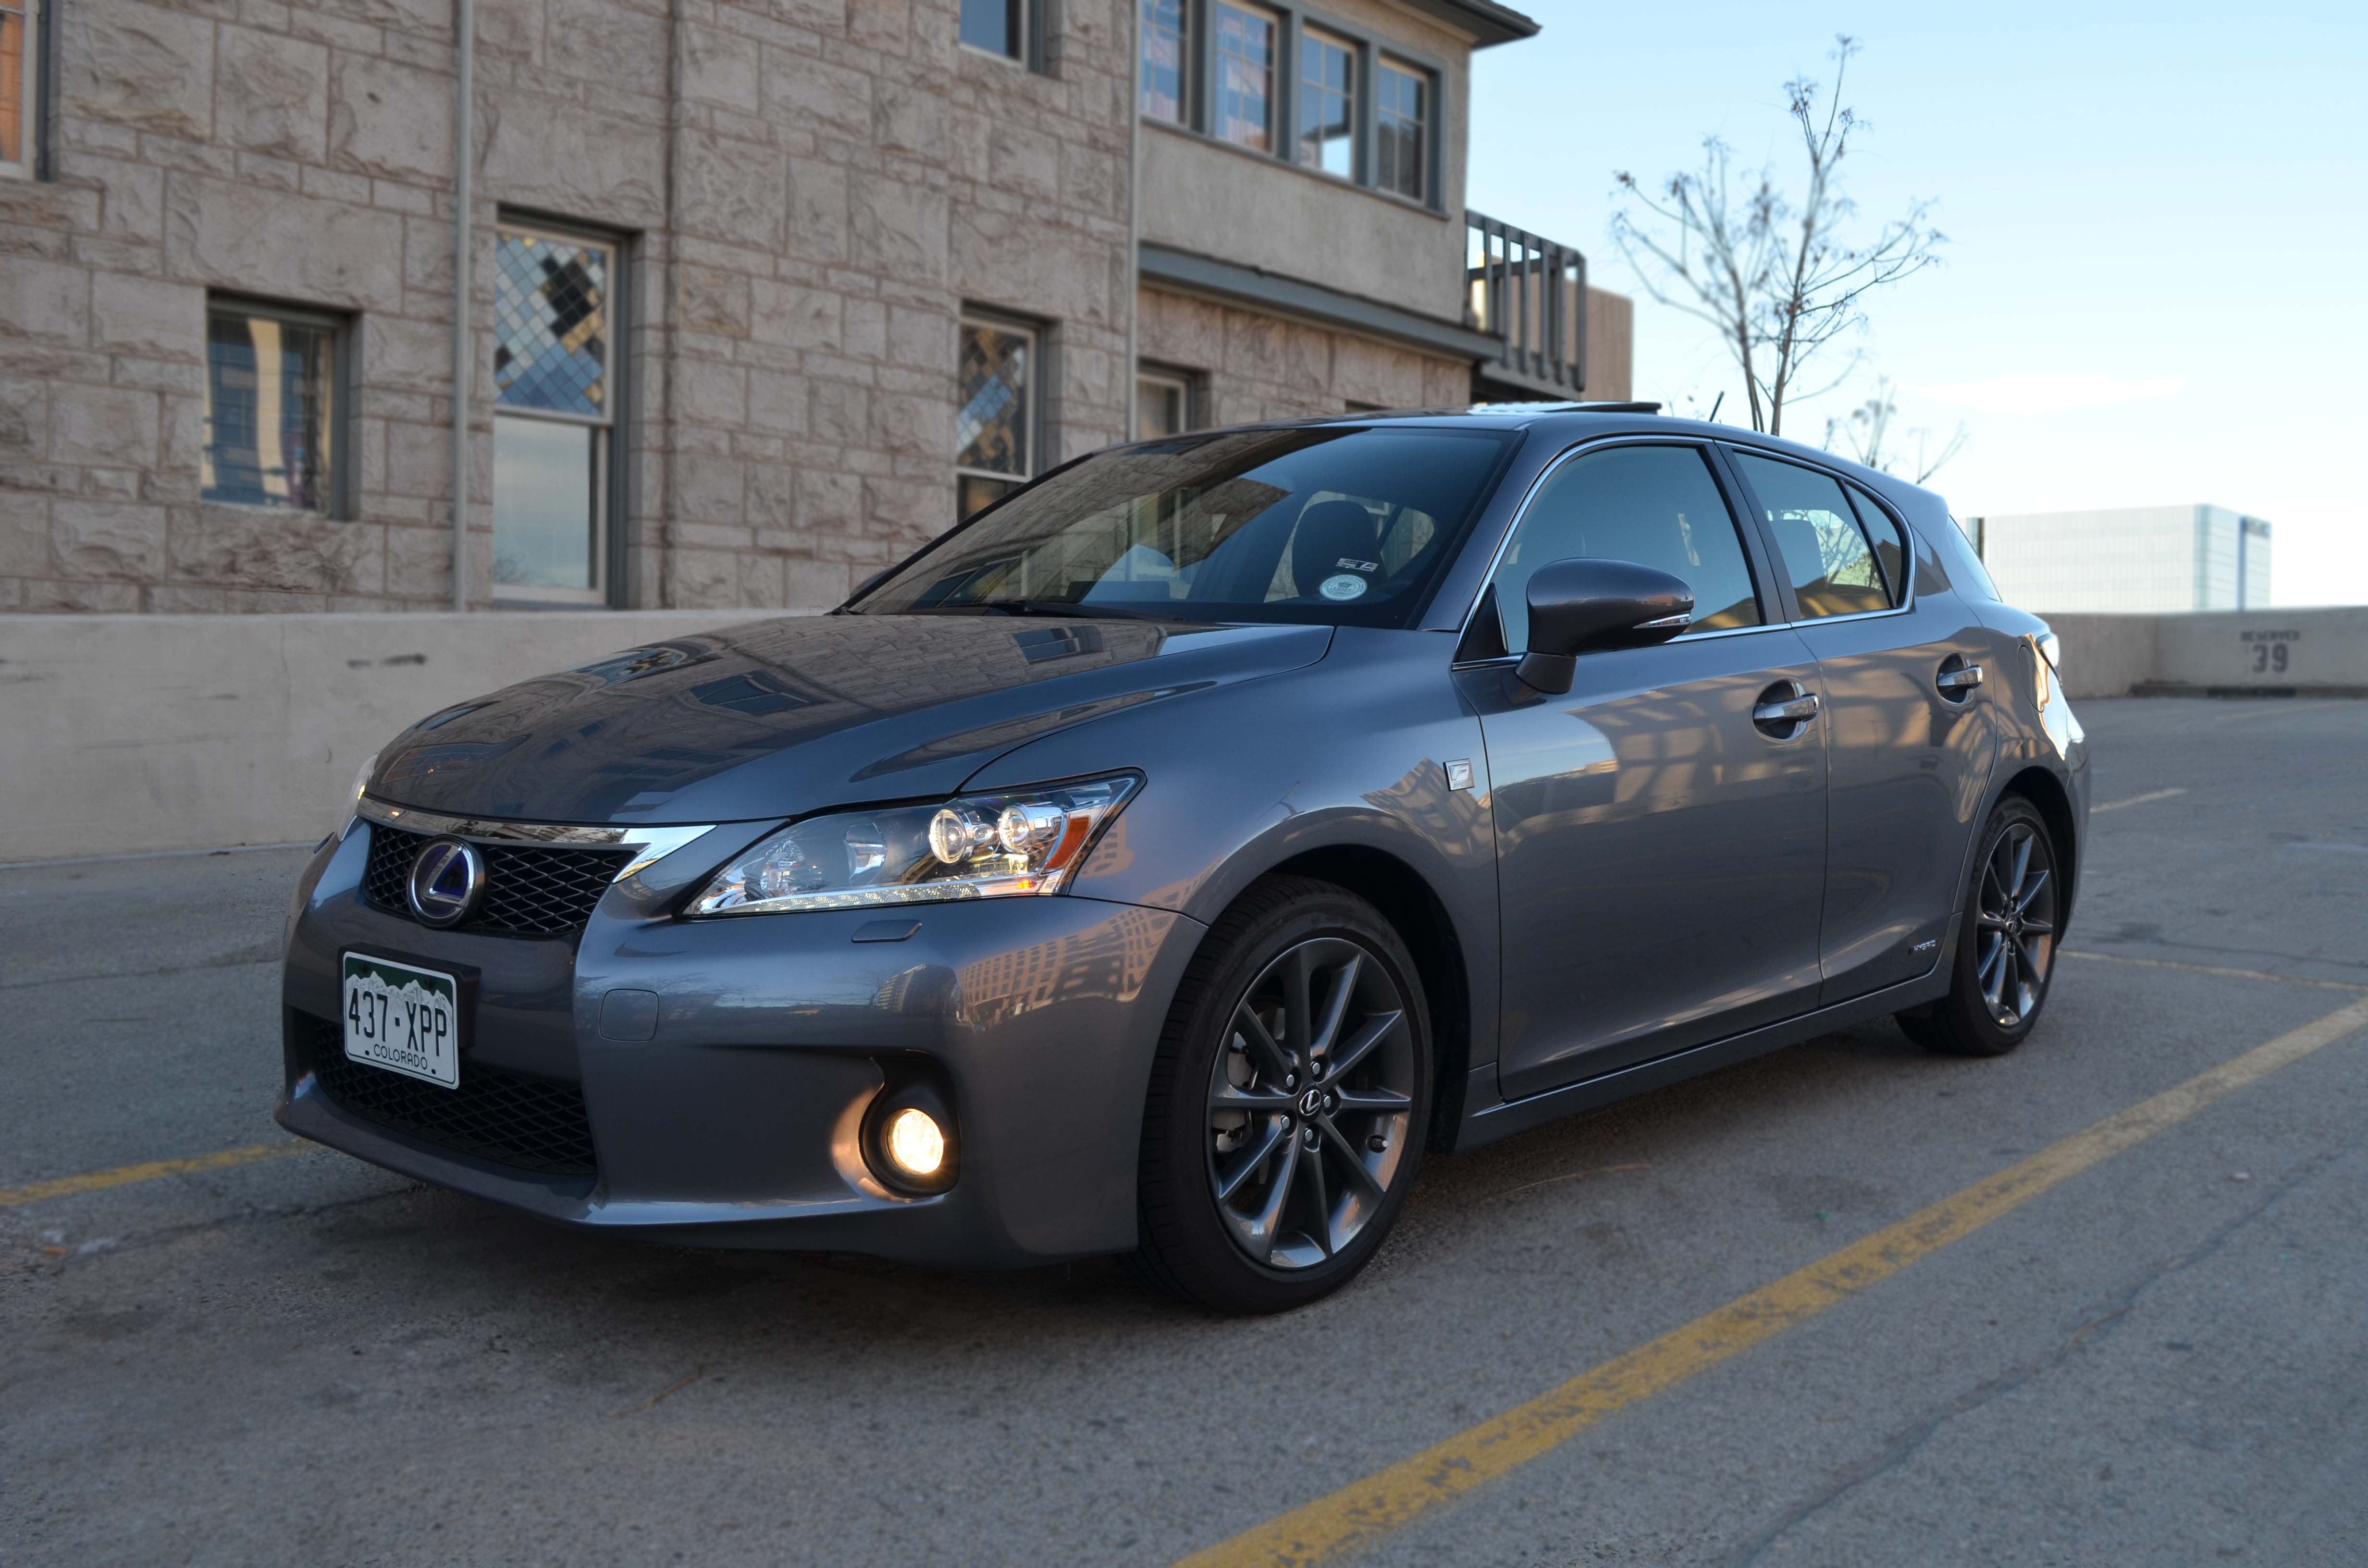 The 2012 Lexus CT 200h is 3,206 Pounds of Hybrid Sexiness